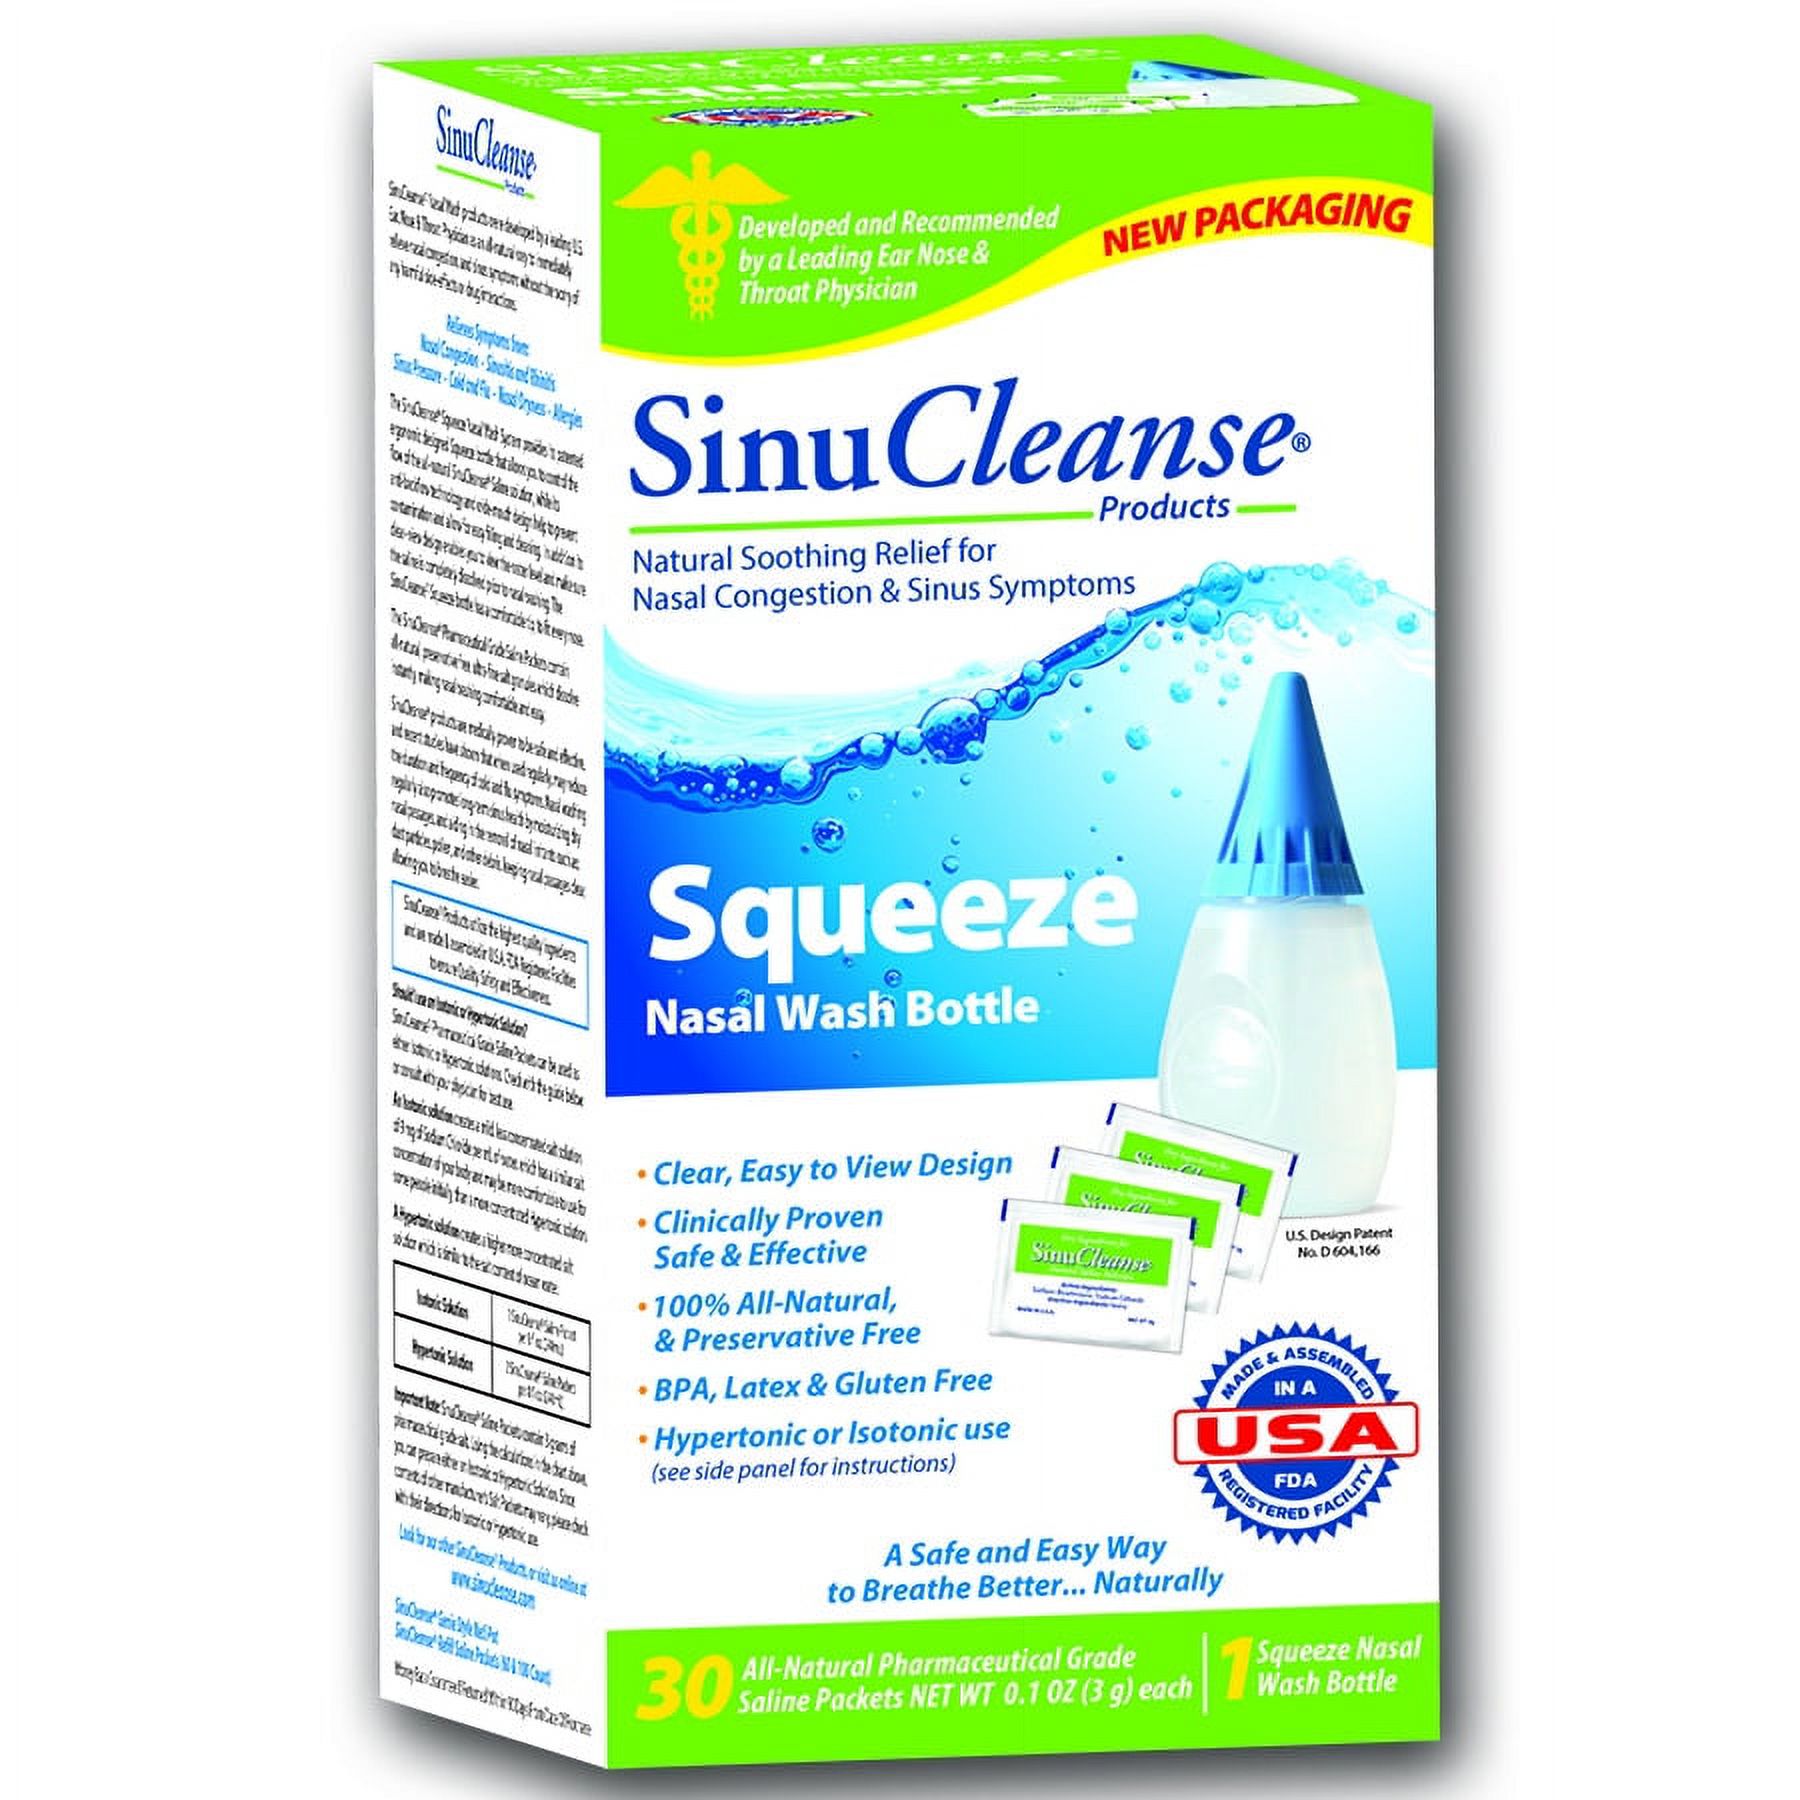 SinuCleanse Squeeze Bottle Nasal Wash System - image 1 of 2